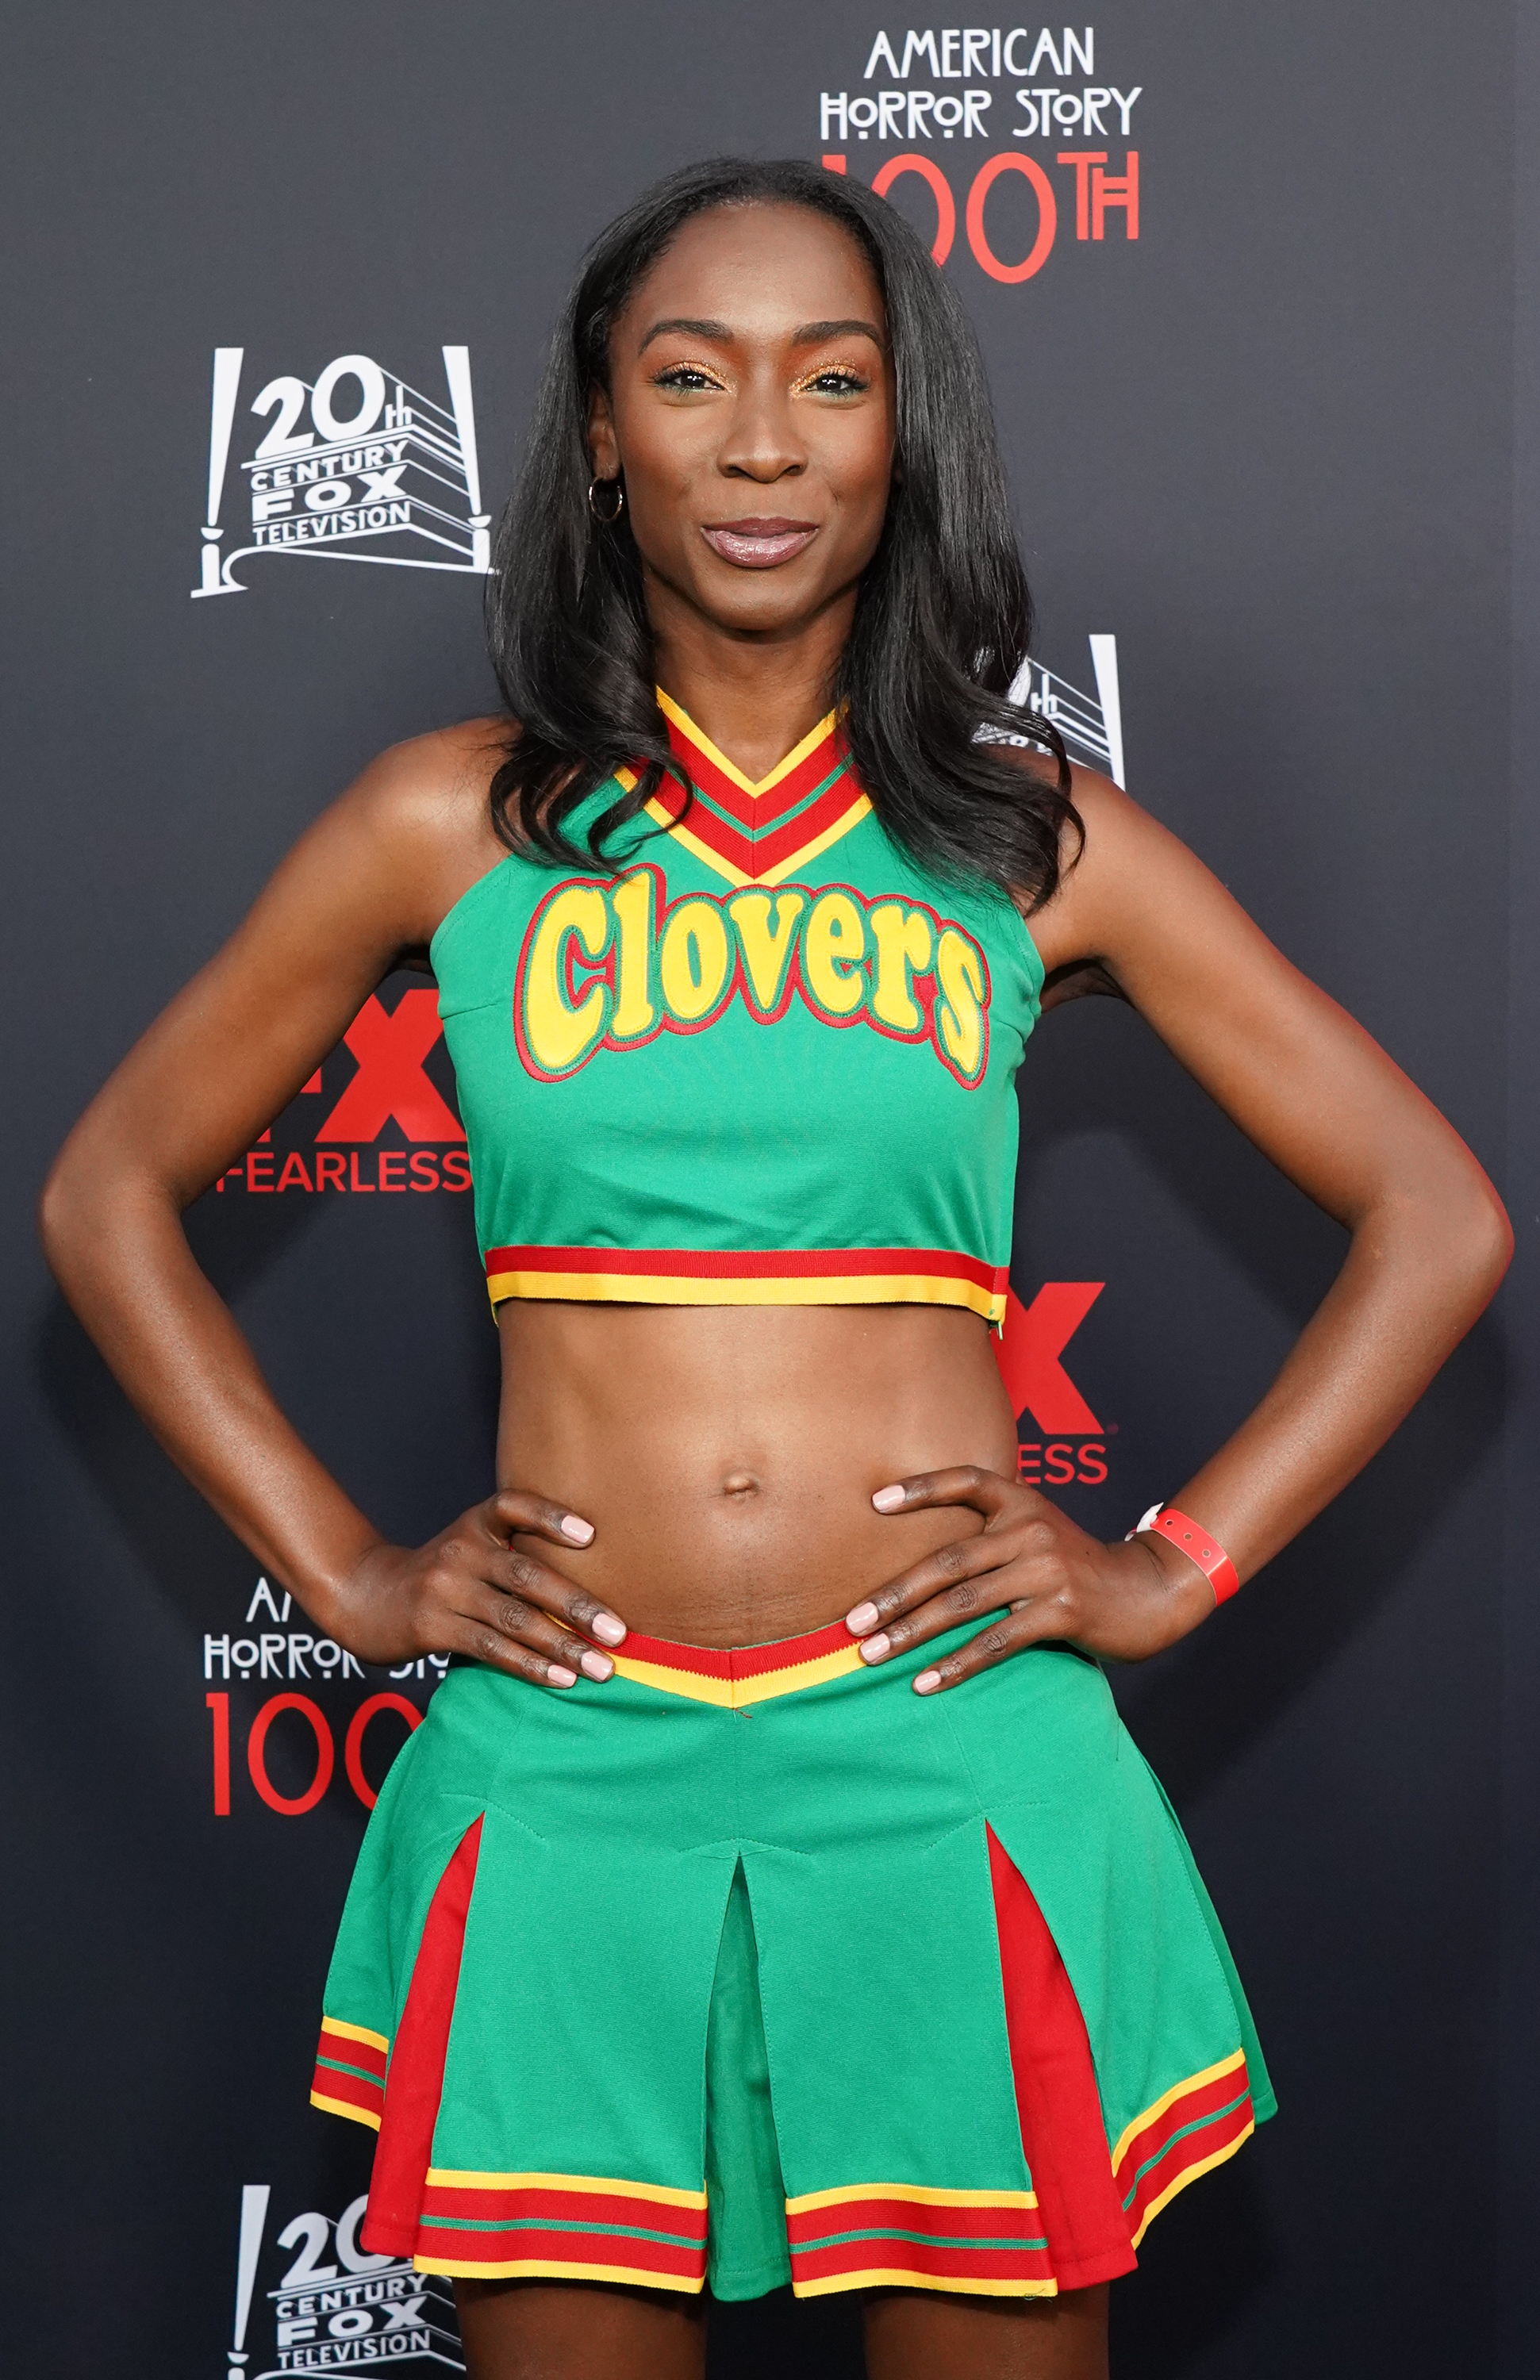 Angelica Ross on the red carpet dressed up as a Clovers cheerleader from the film &quot;Bring It On&quot;